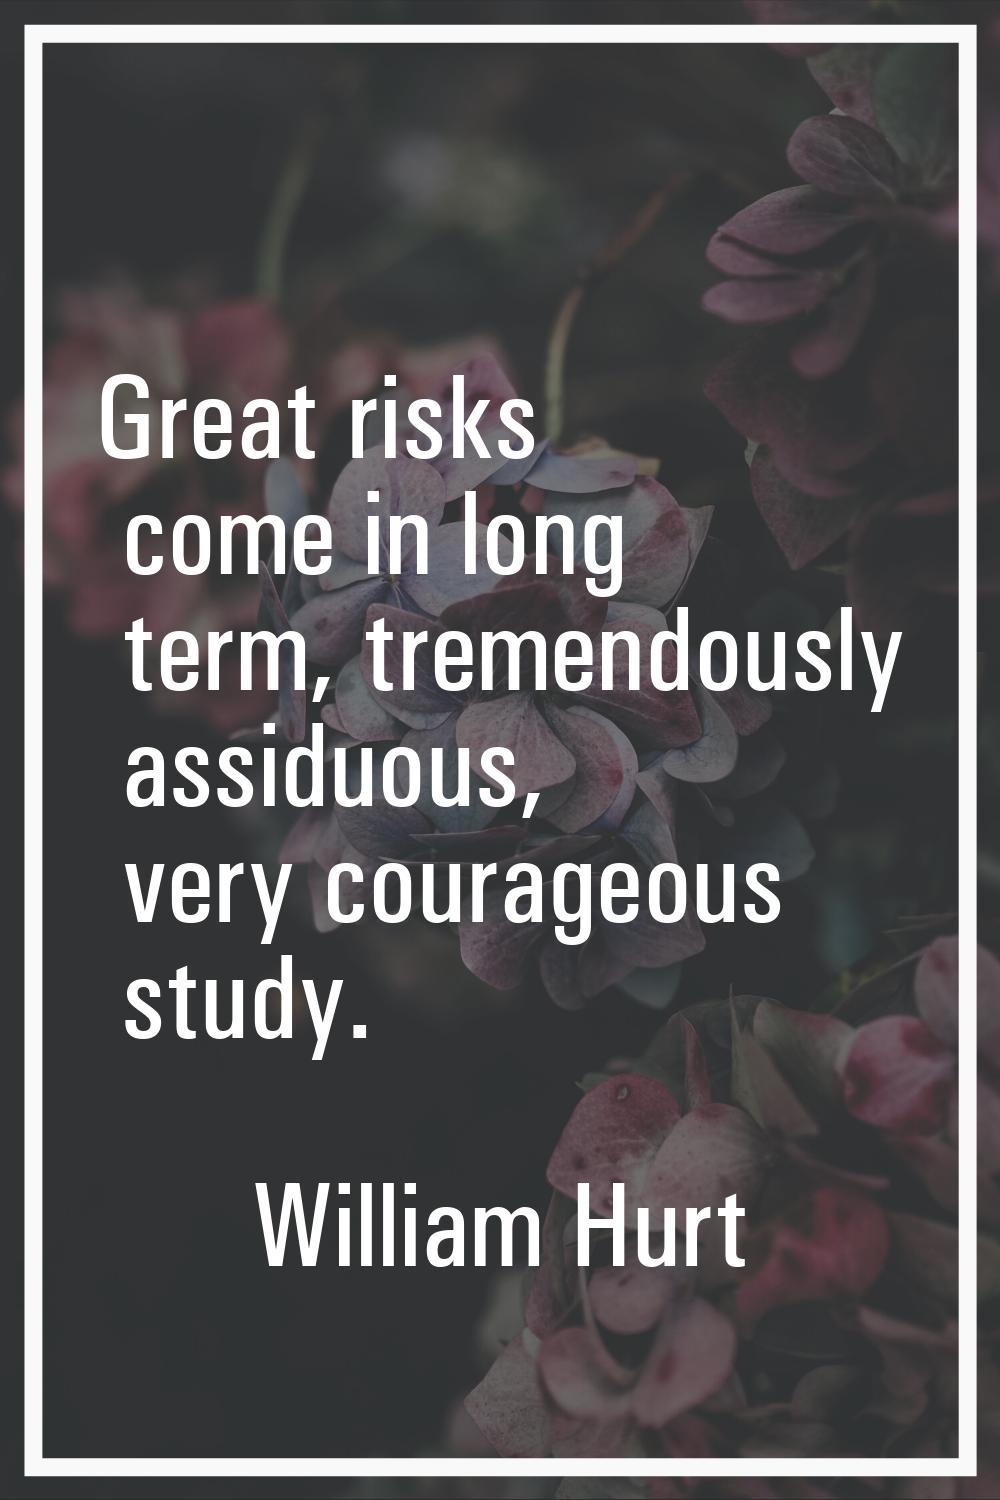 Great risks come in long term, tremendously assiduous, very courageous study.